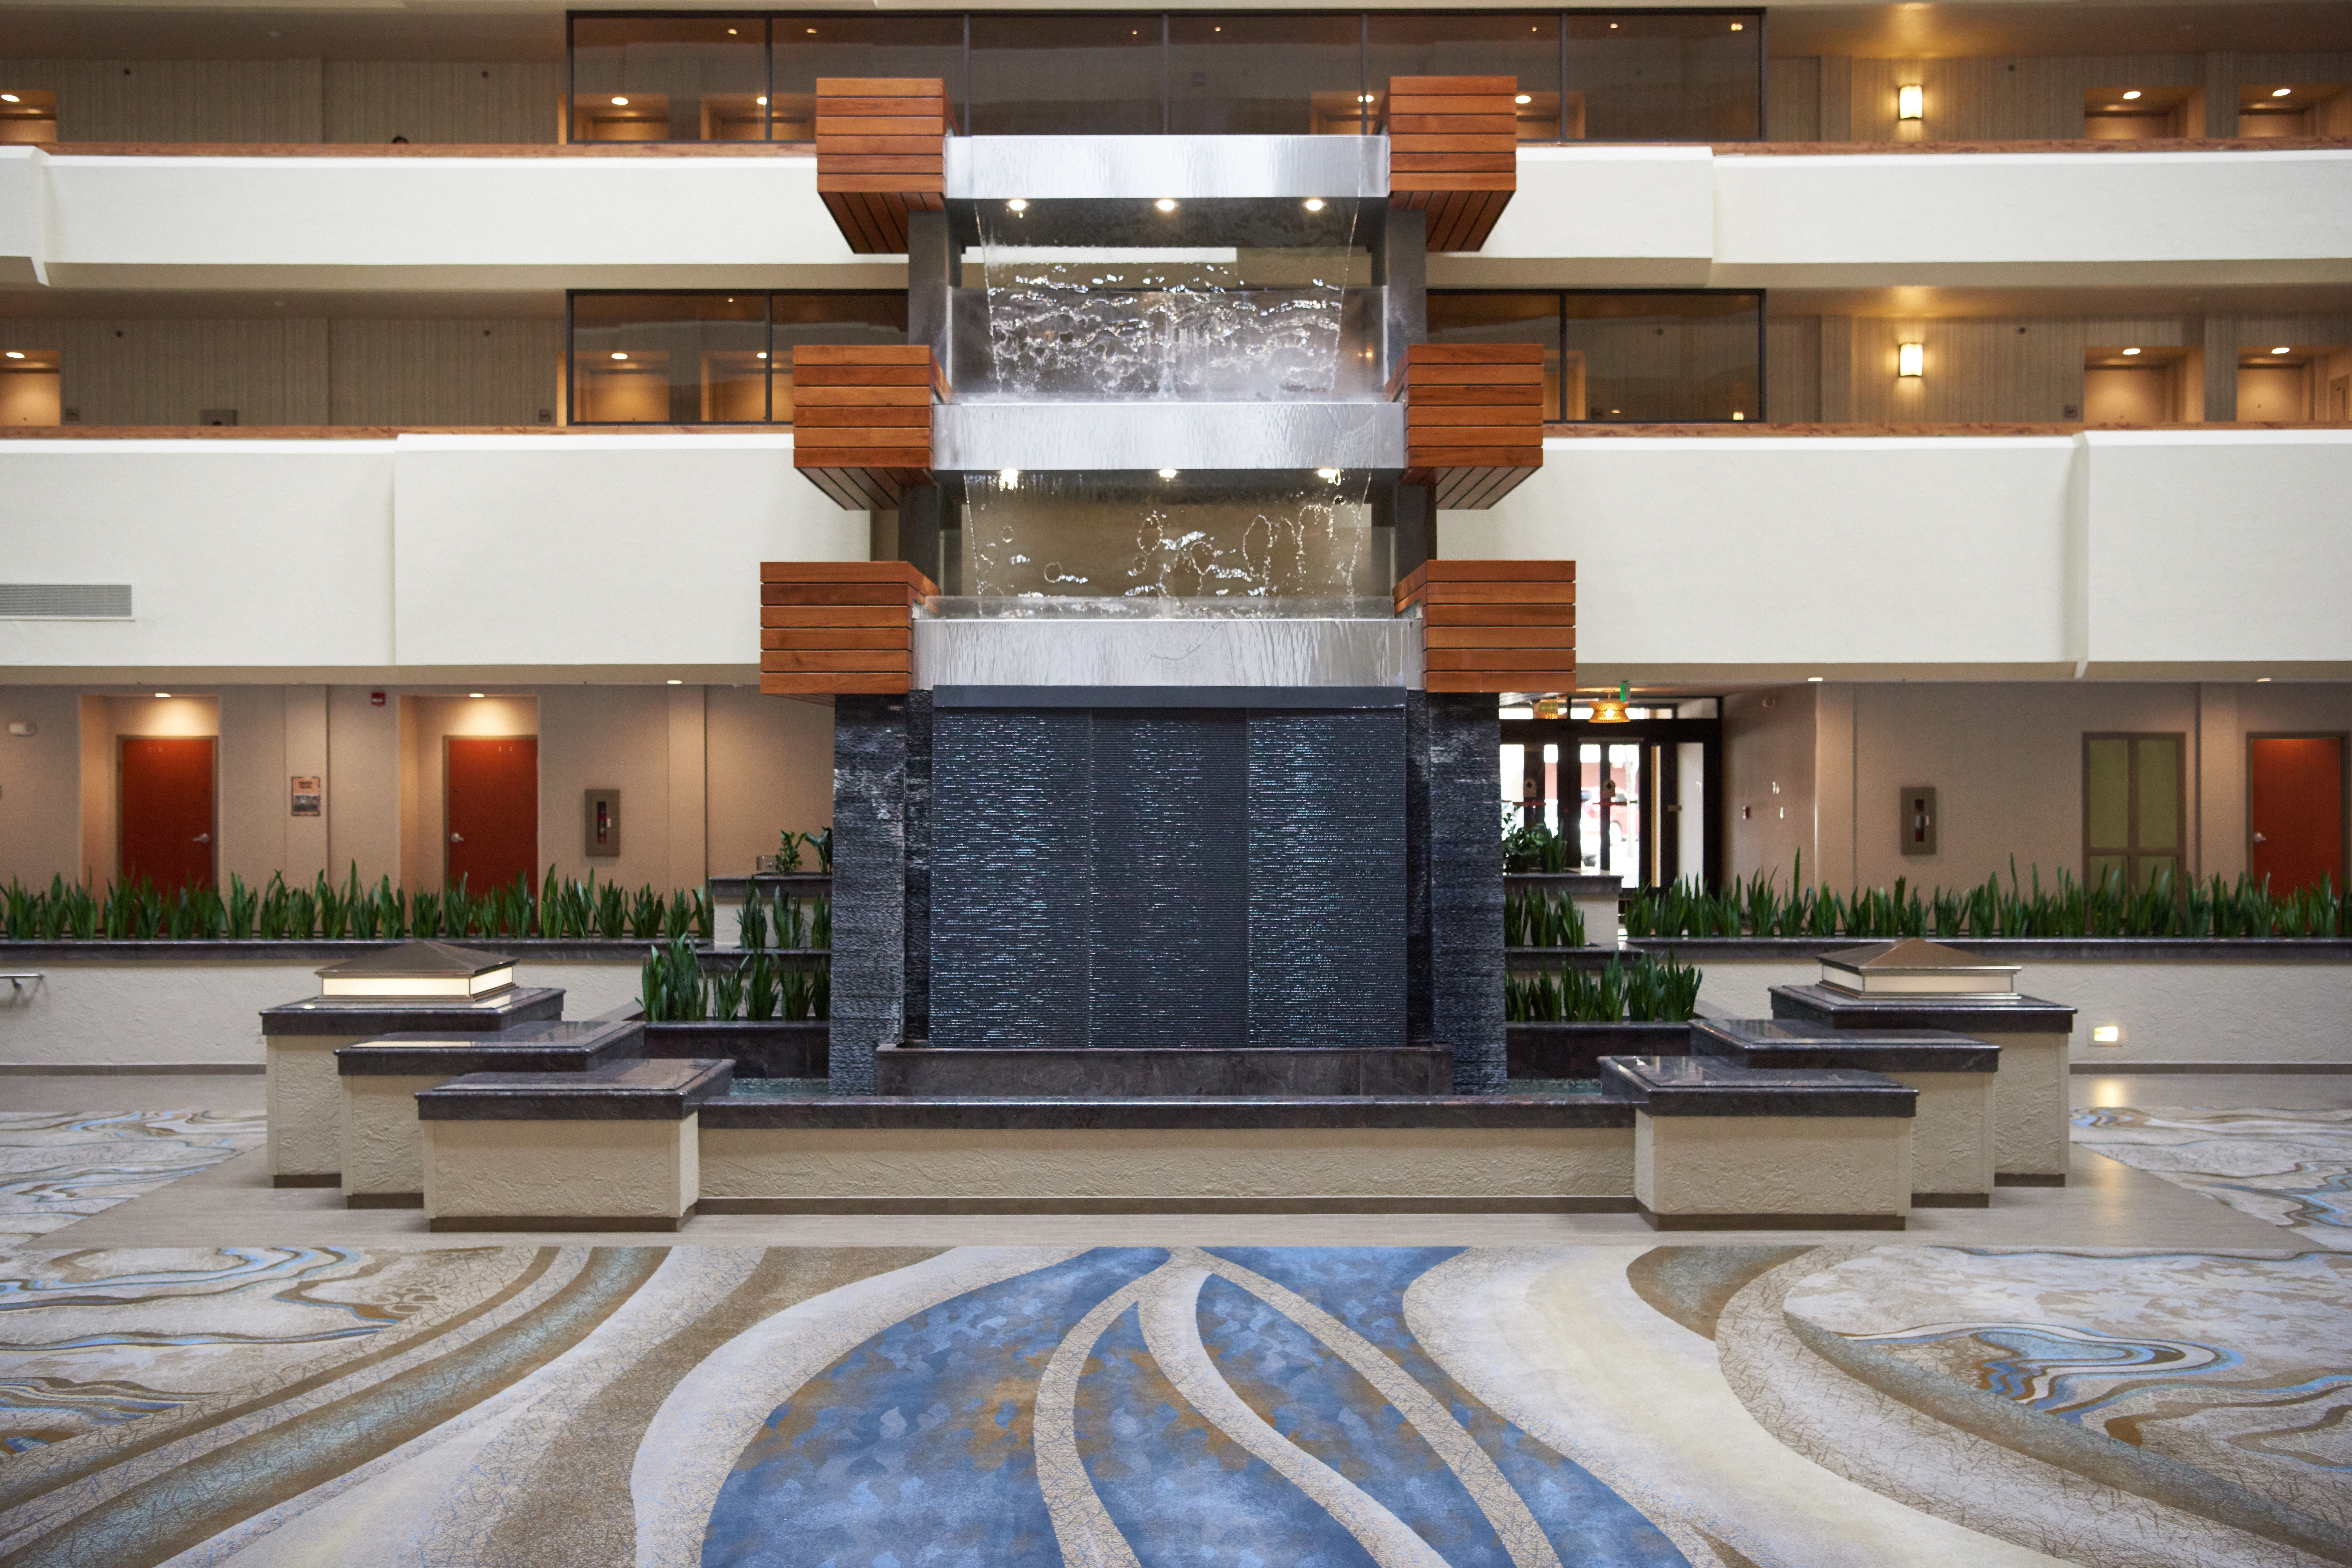 Detailed View of Waterfall Feature in Lobby Area